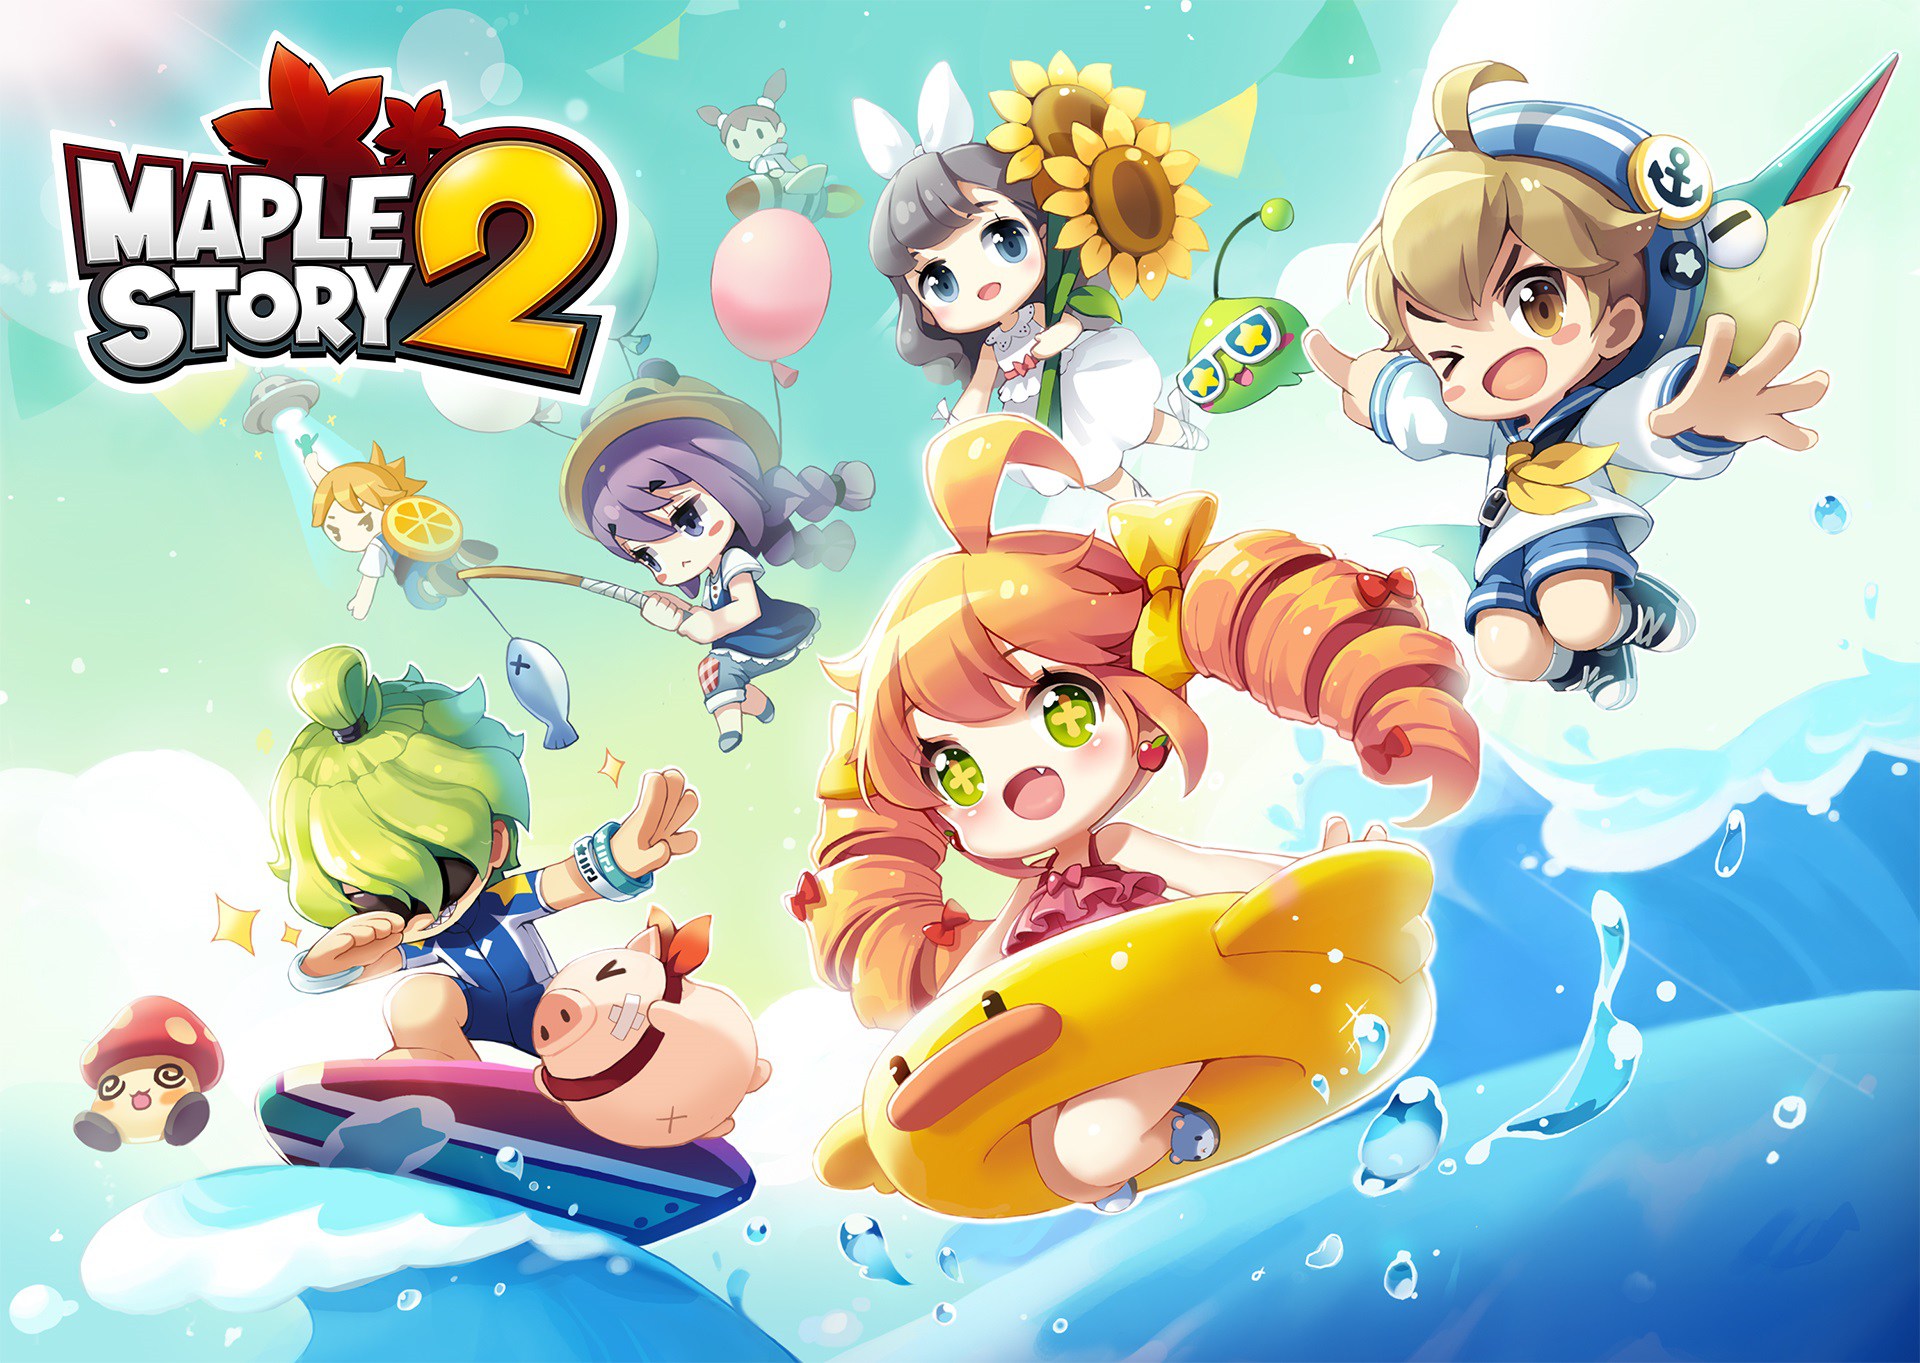 Video Game MapleStory 2 HD Wallpaper | Background Image